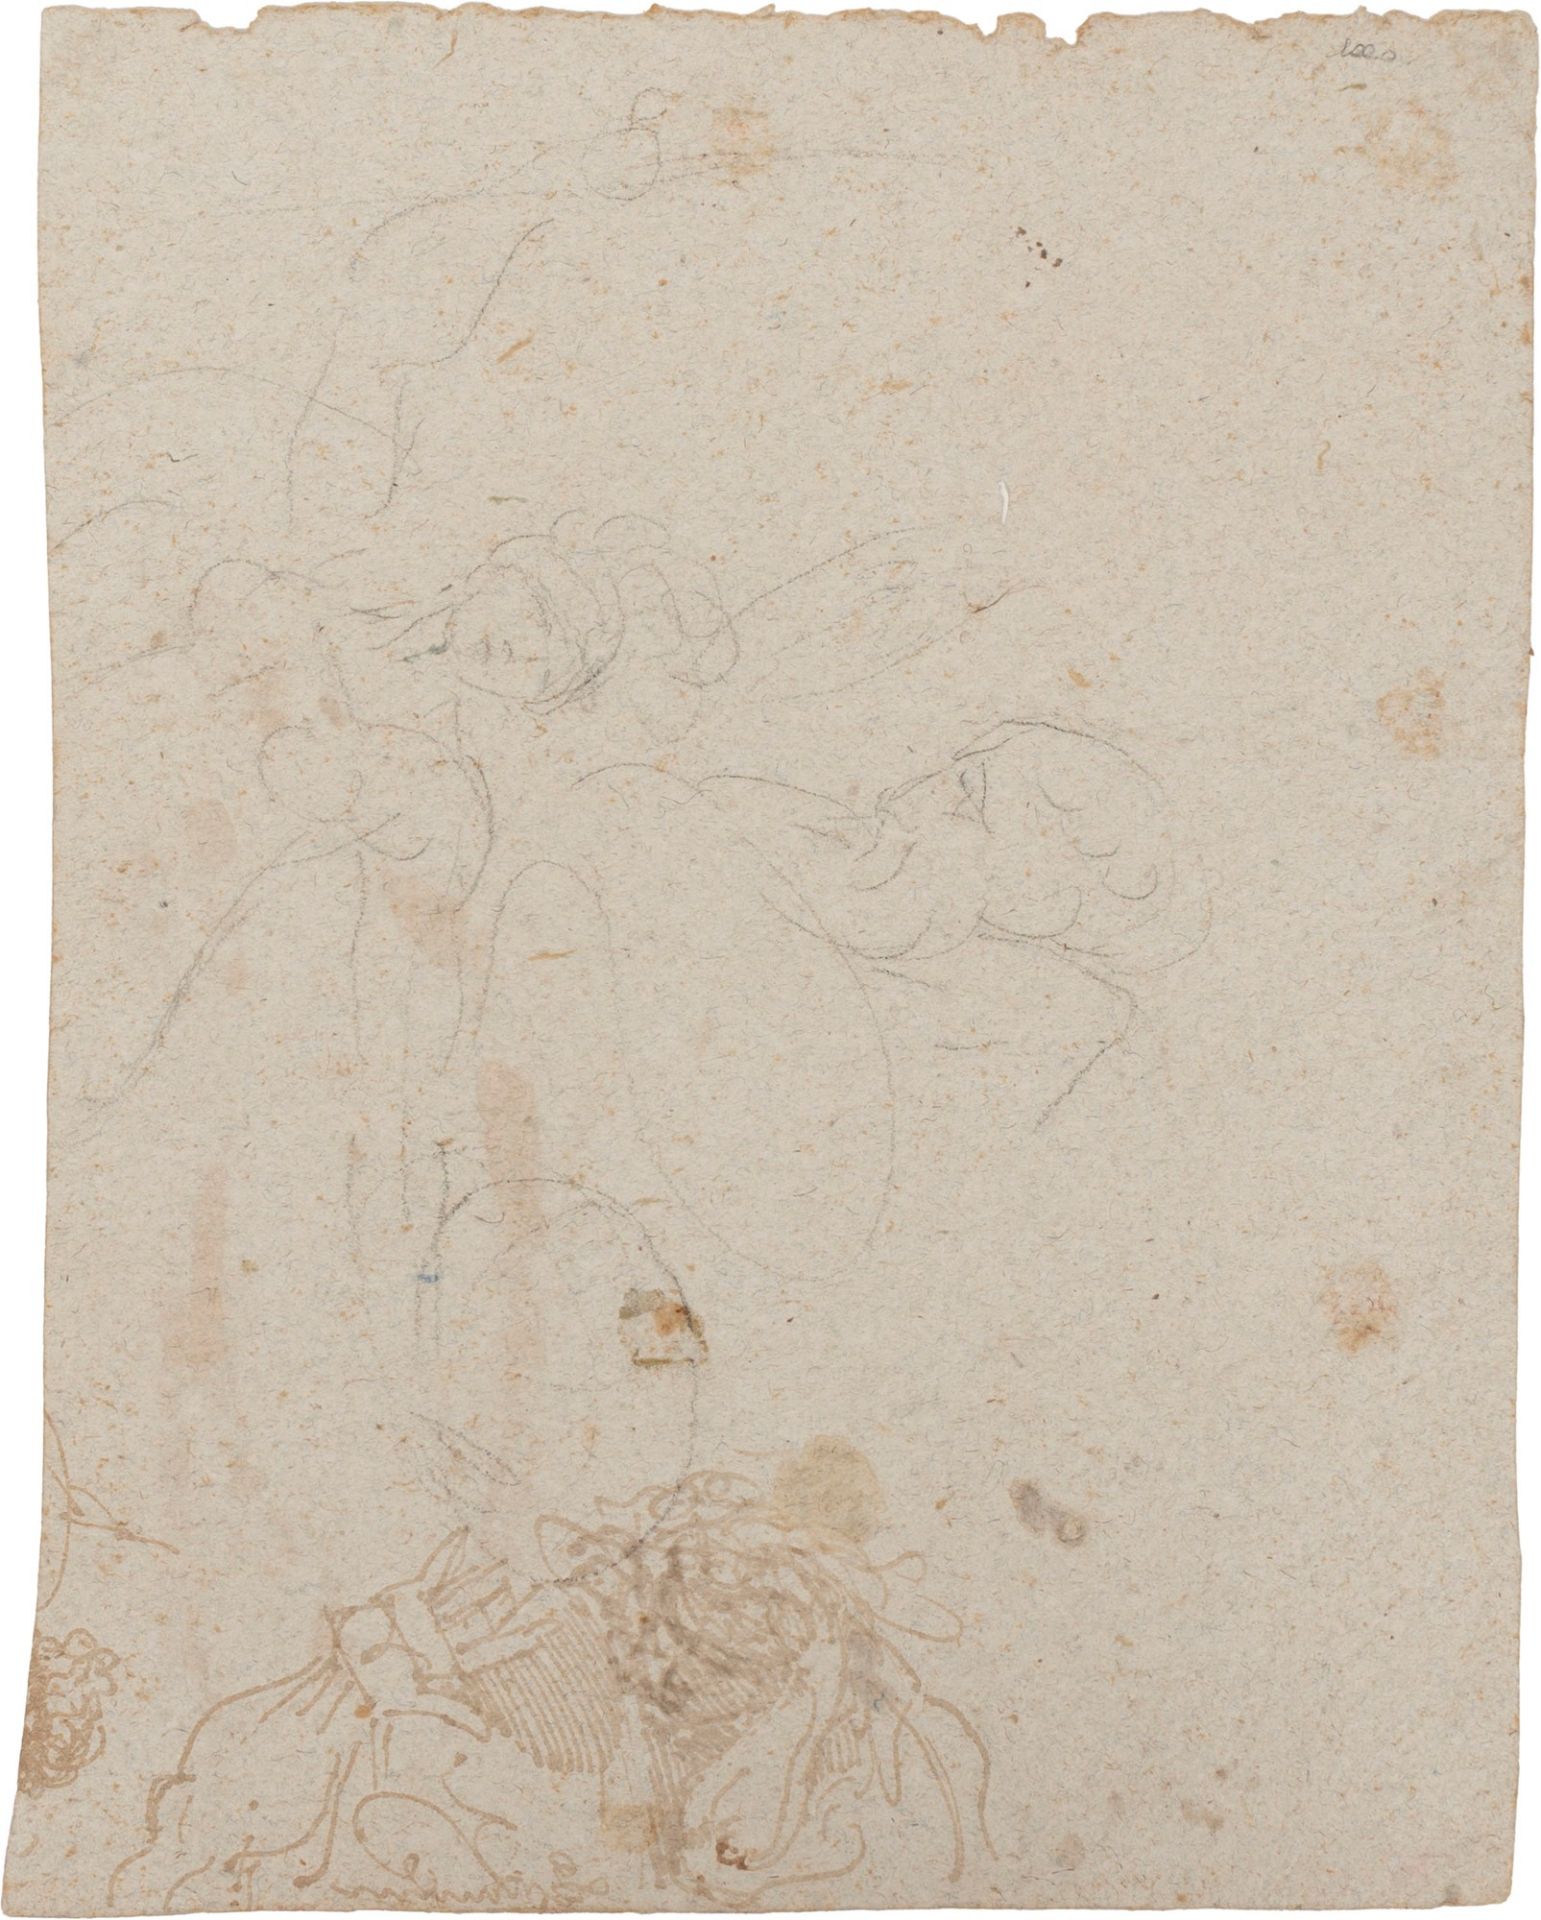 Neoclassical School - Study for figures (recto); Sketches of Figures (verso) - Image 2 of 2